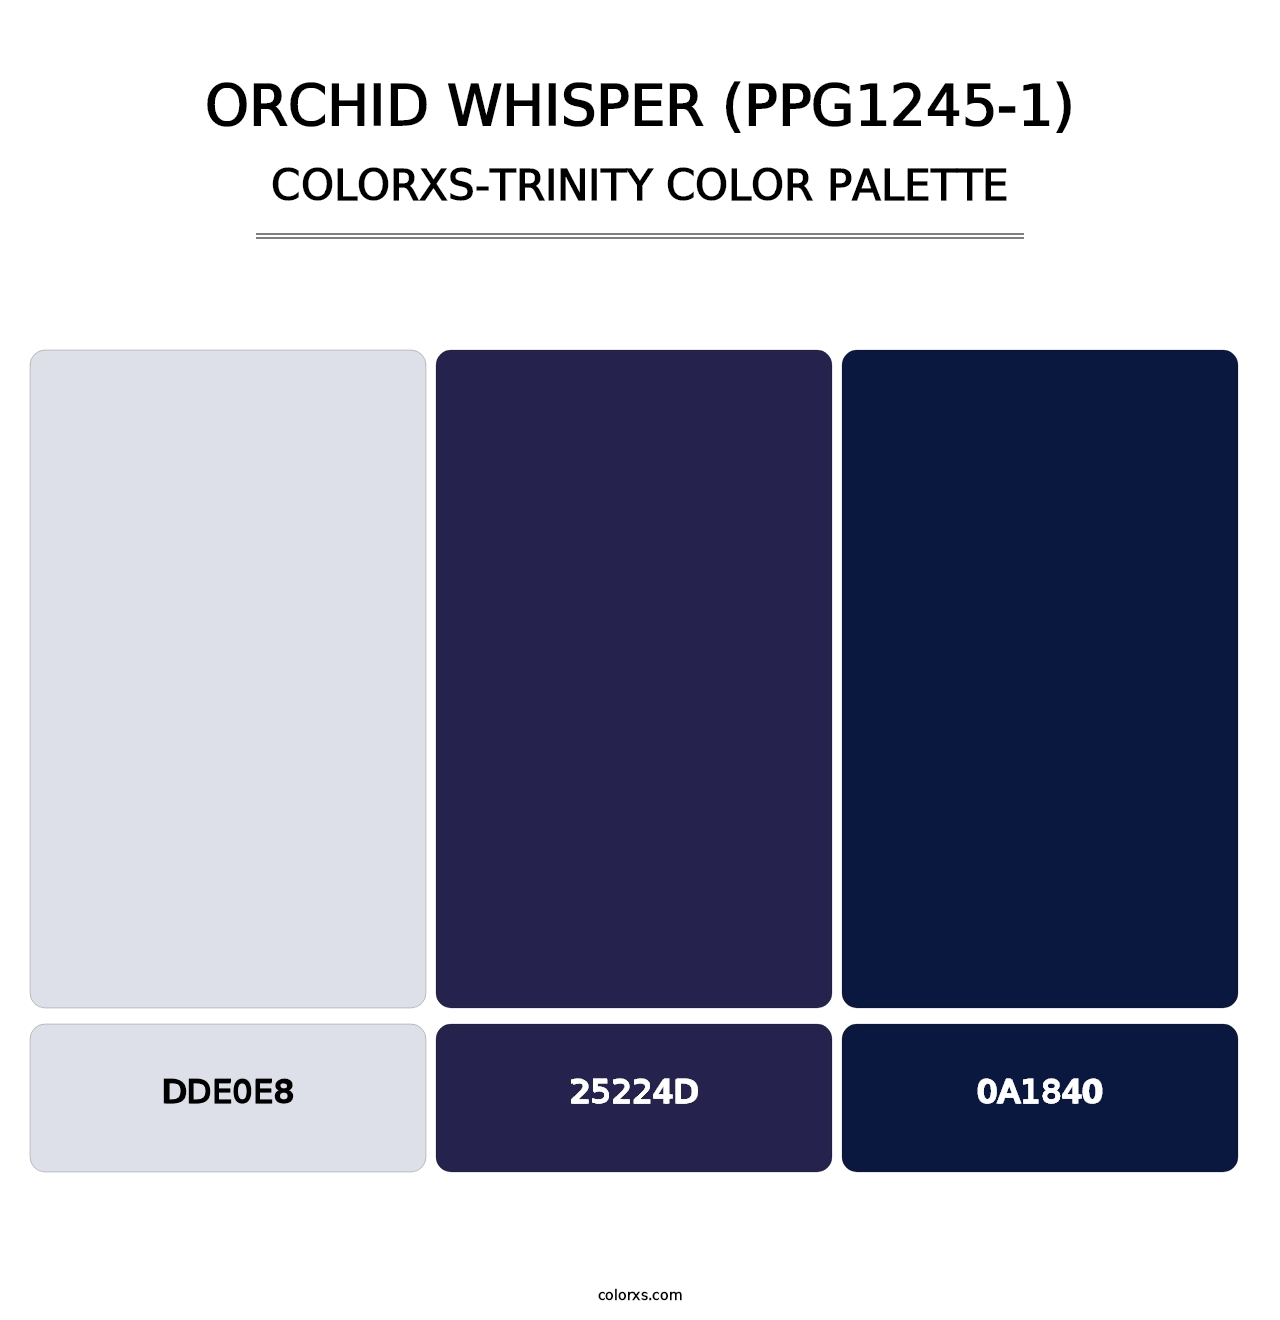 Orchid Whisper (PPG1245-1) - Colorxs Trinity Palette